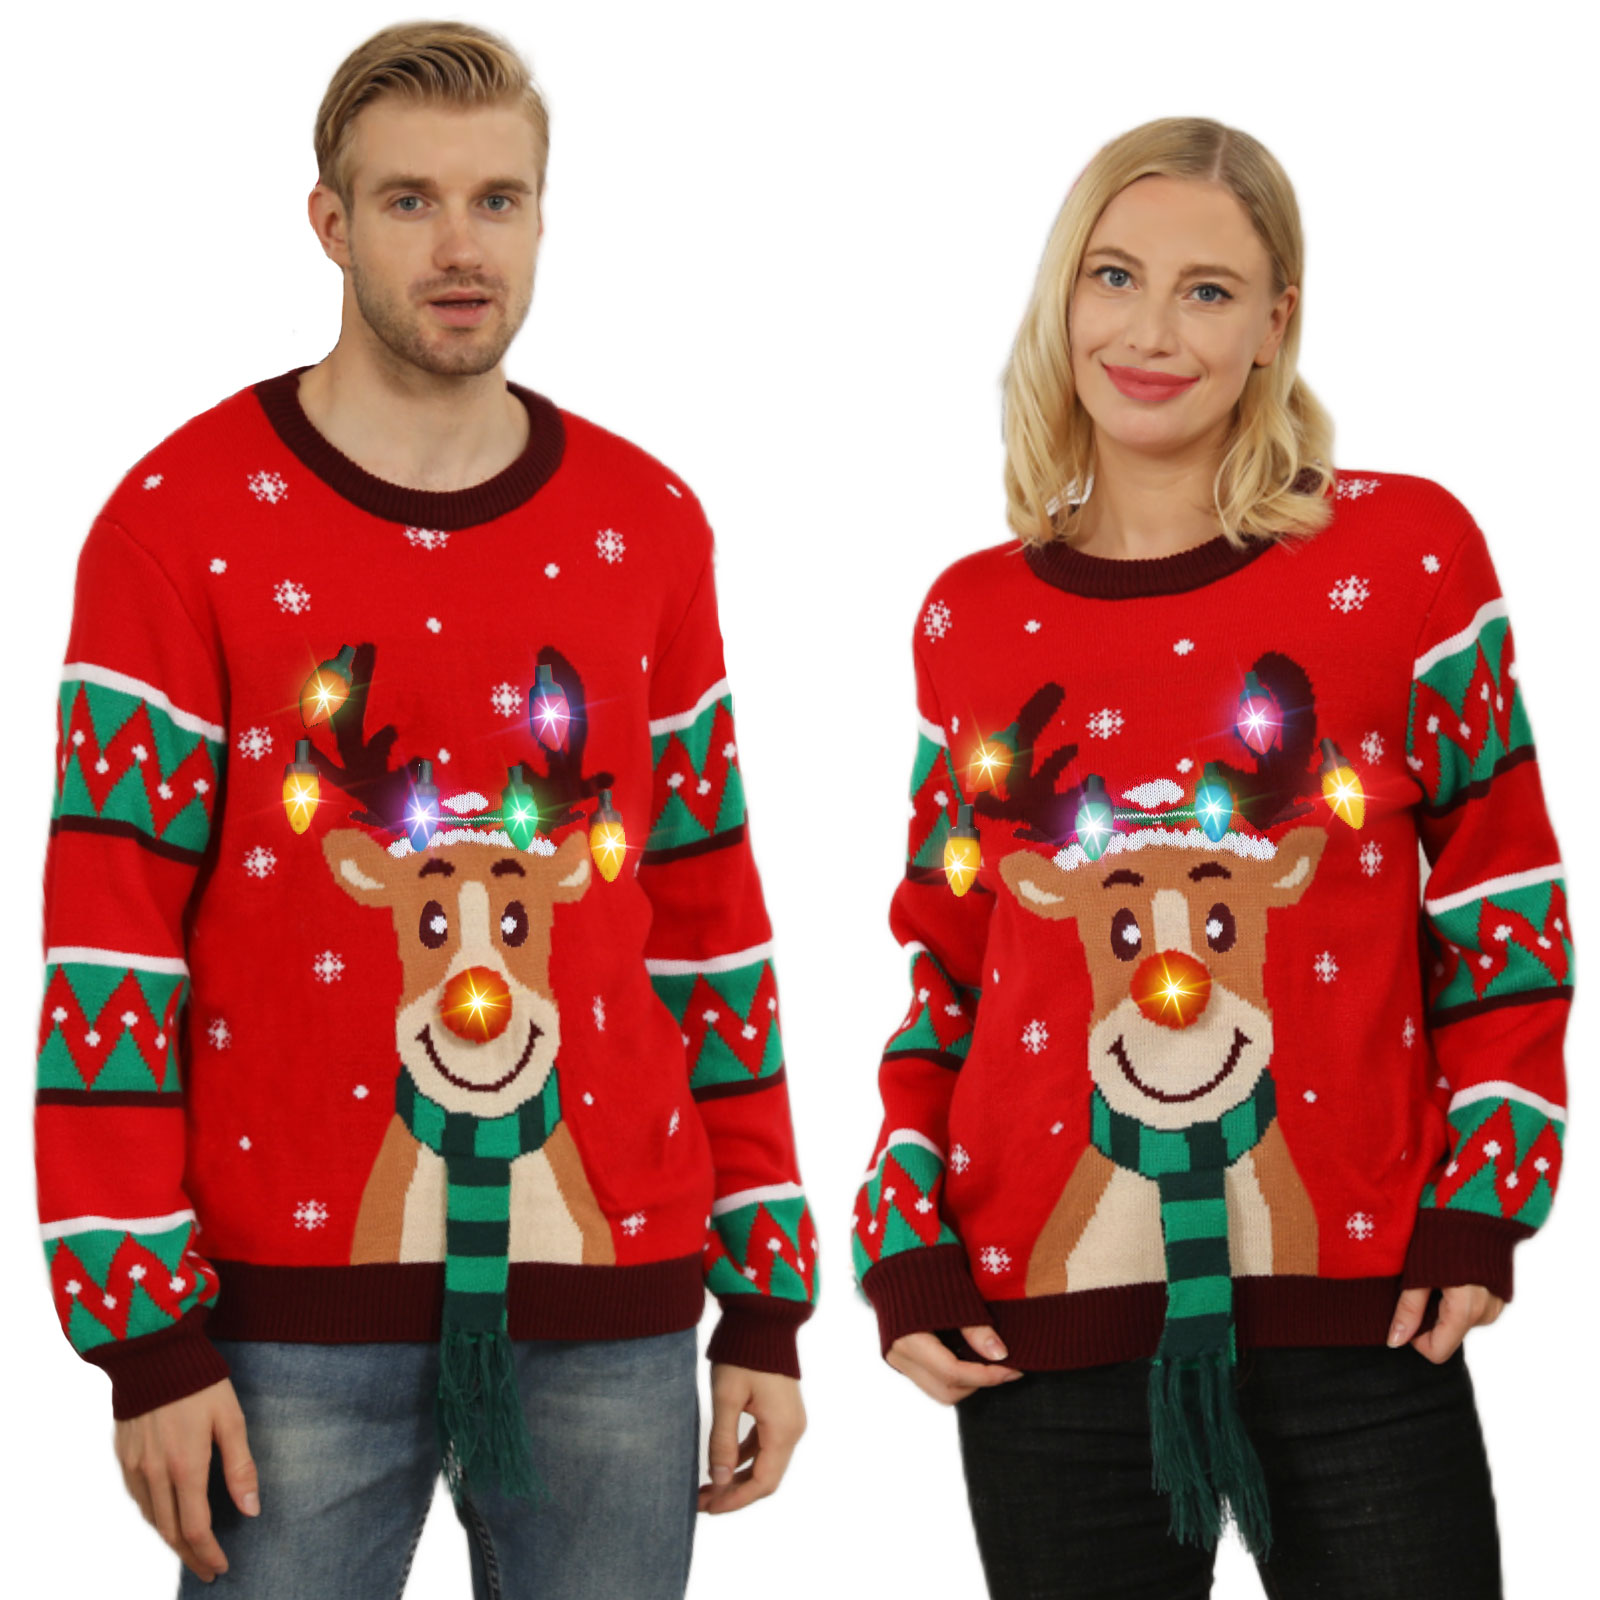 Ugly Christmas Sweater for Women Men,Light up Christmas Sweater,Funny Unisex Reindeer Xmas Ugly Sweaters for Couples - image 1 of 6